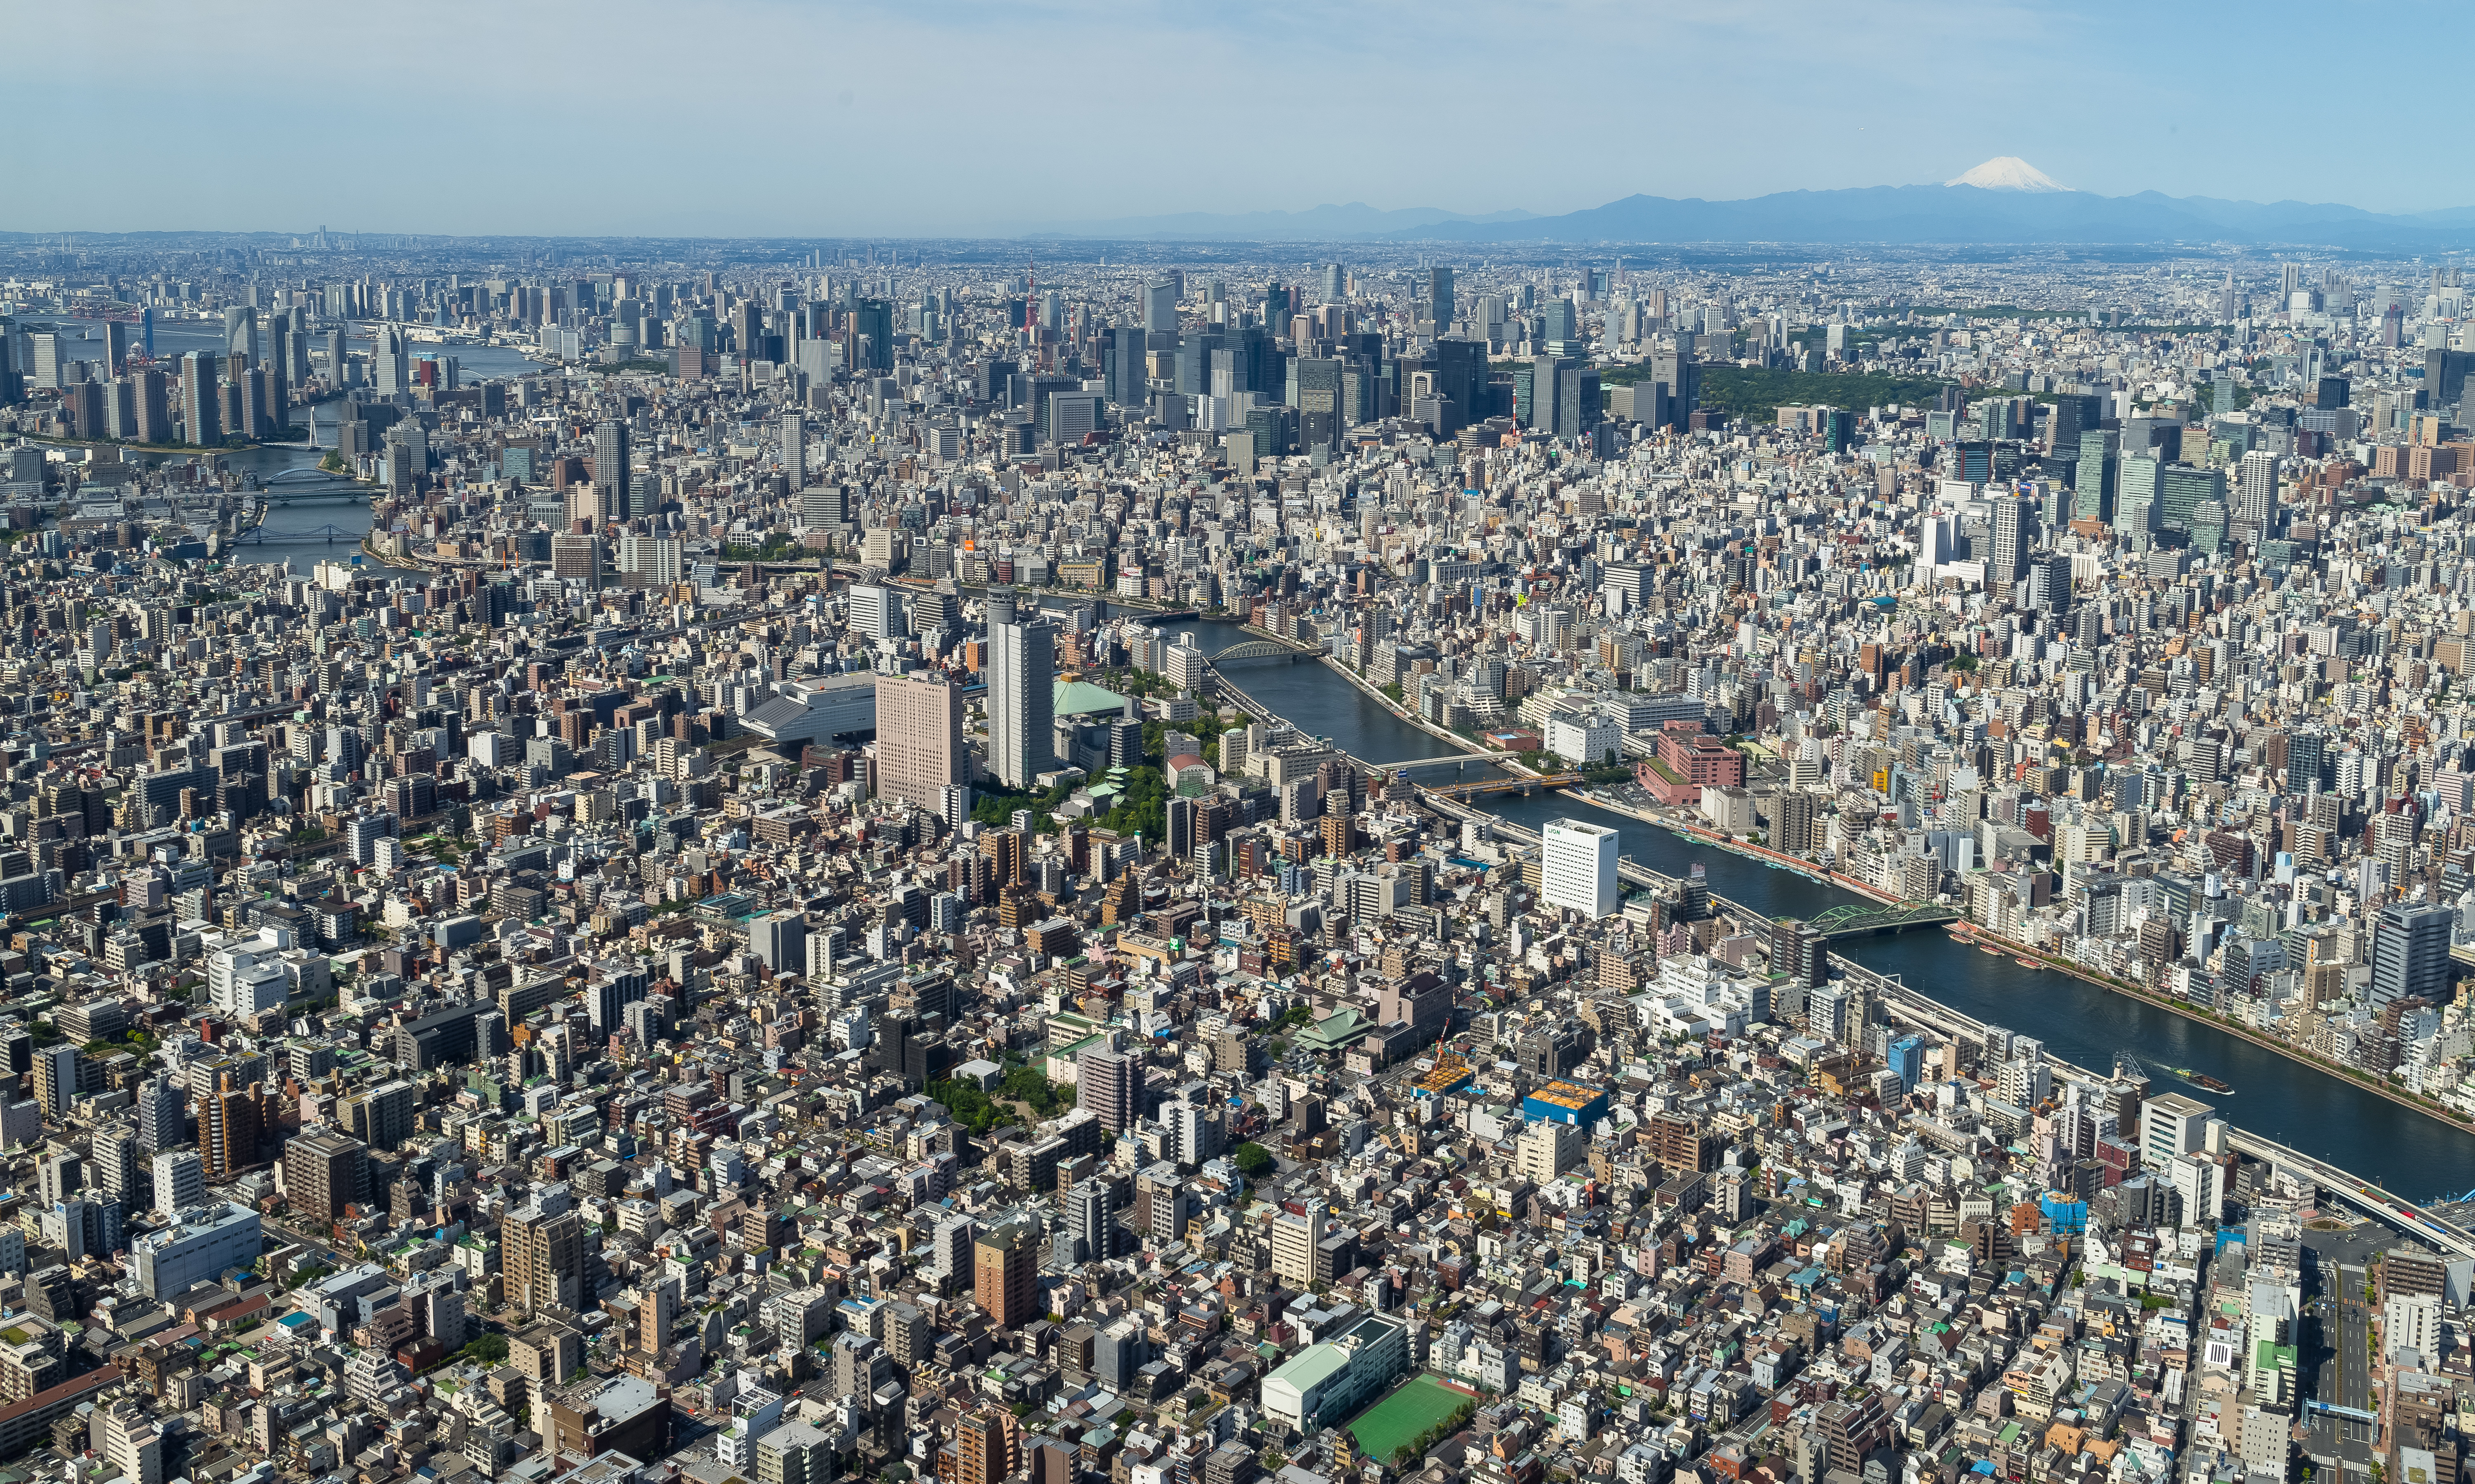 File:Tokyo from the top of the SkyTree.JPG - Wikimedia Commons